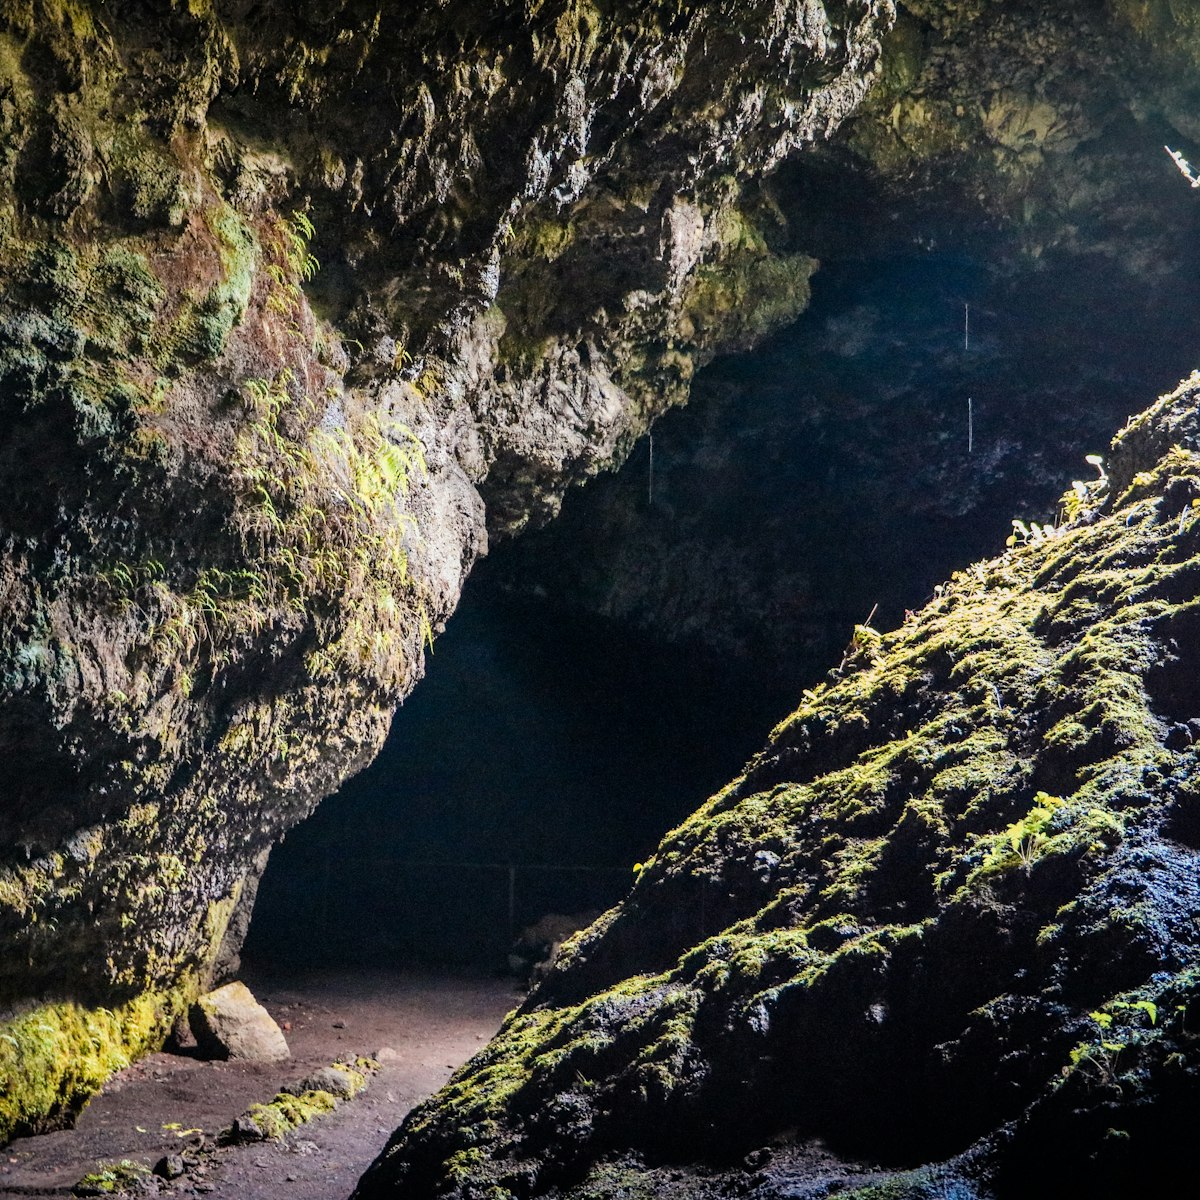 View from the entry to the Hana Lava Tube.
